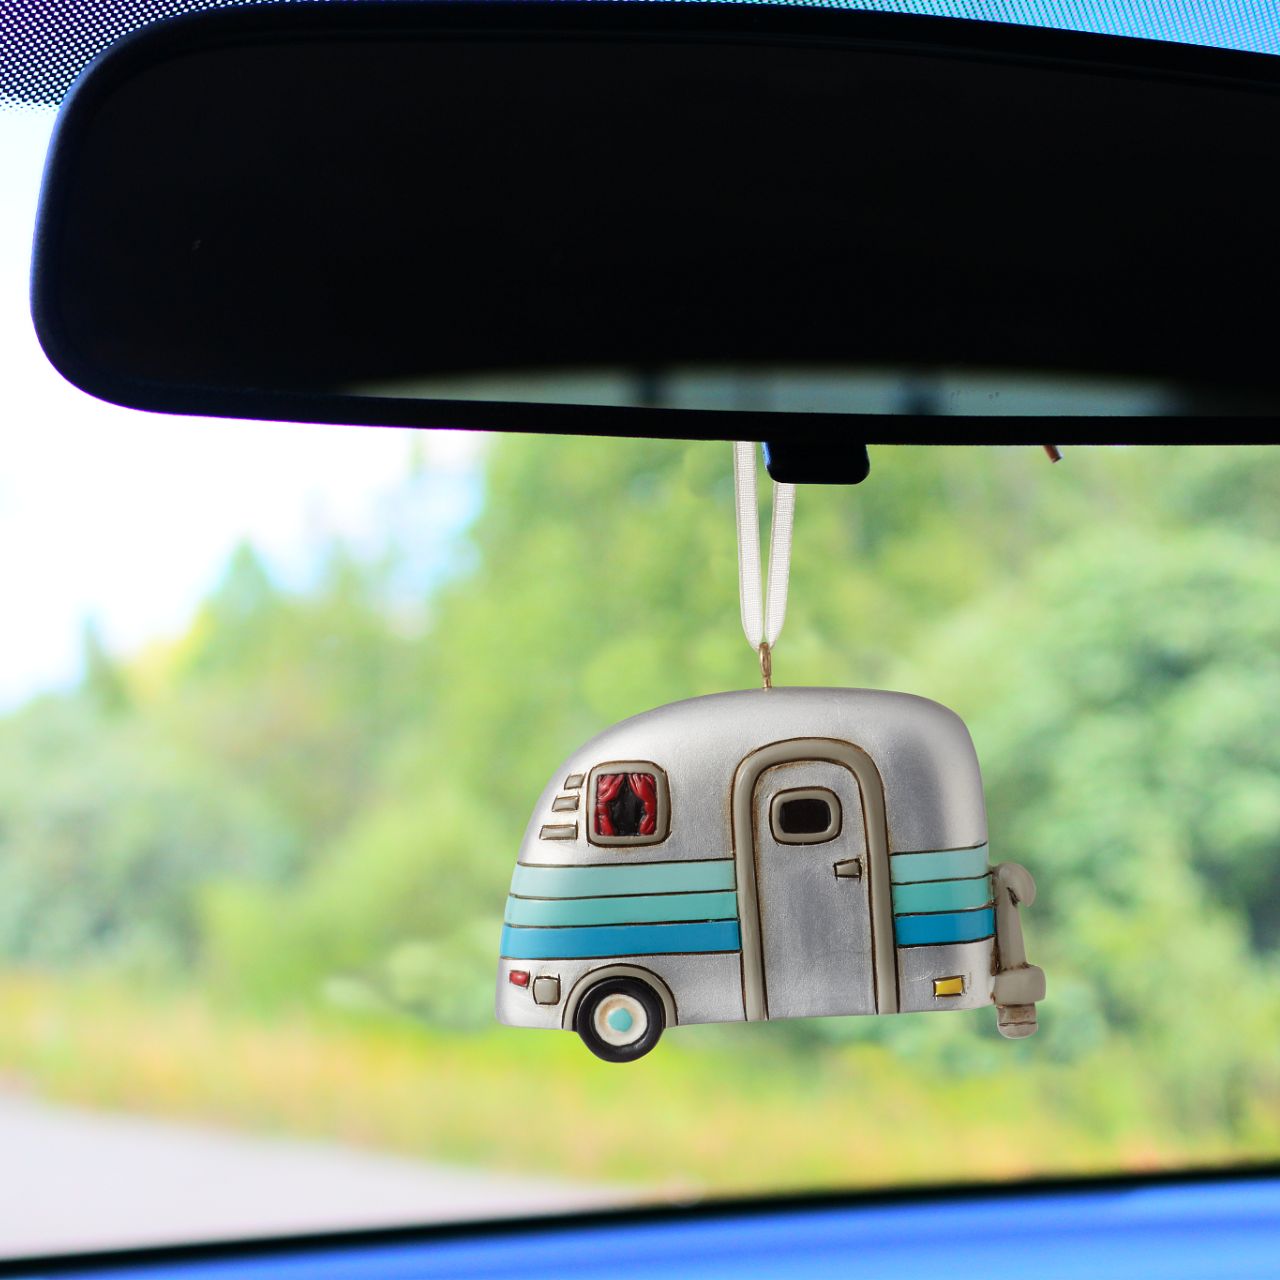 Michelle Allen Happy Camper Hanging Ornament  Who is ready for a camping trip?. Our Happy Camper Hanging Ornament is inspired by a vintage trailer and has so much personality. The shiny silver colour, retro stripes, window and curtain detail adds lots of charisma to this classic design.